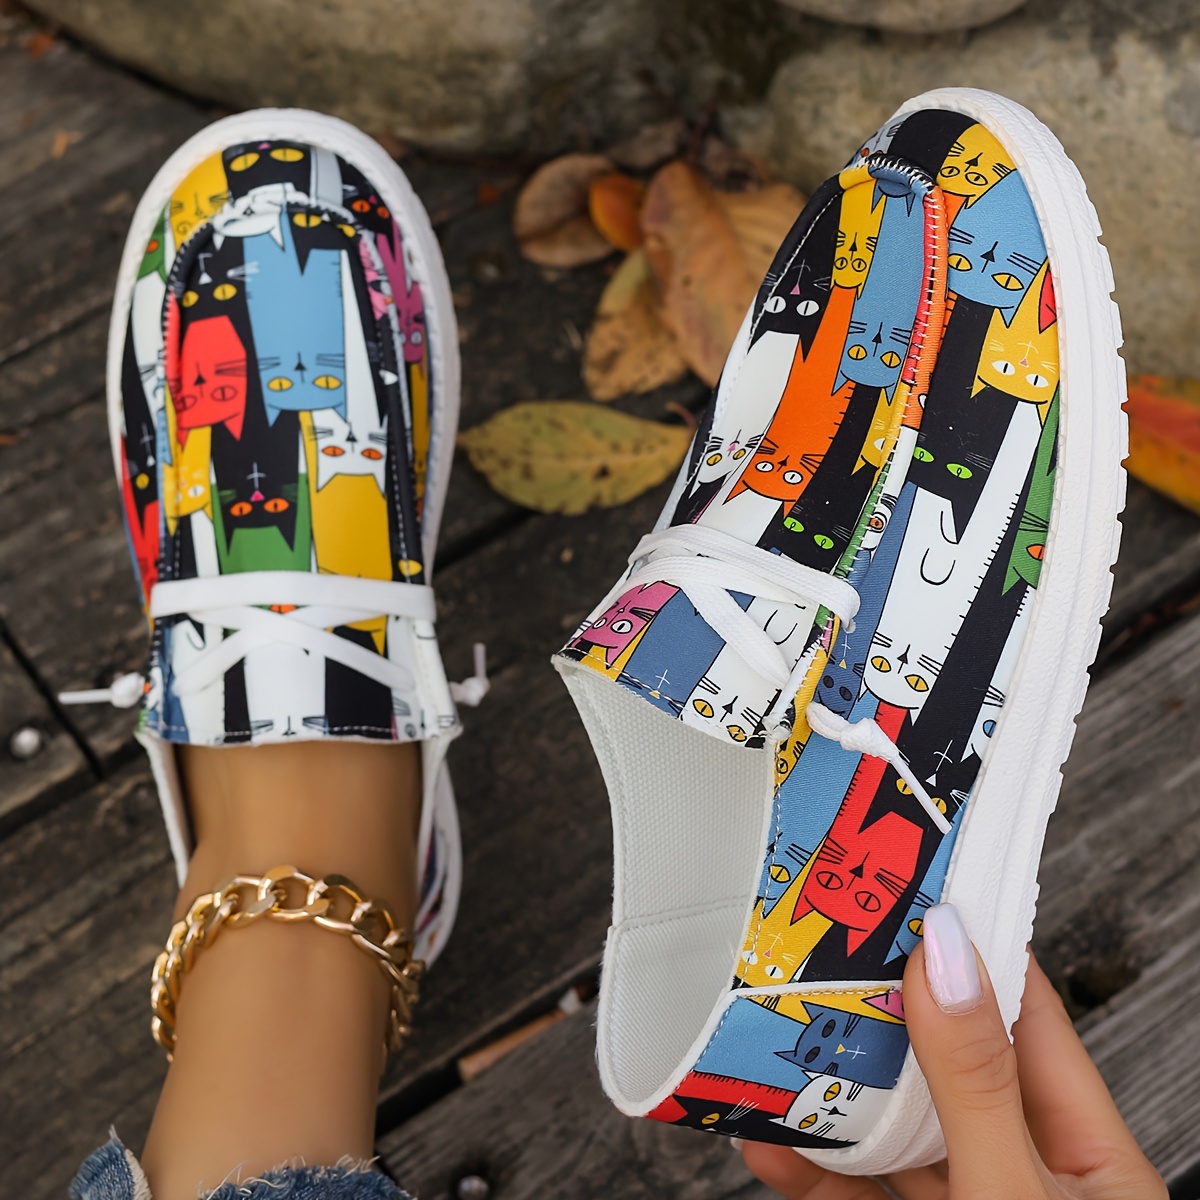 

Women's Fashion Cartoon Cat Pattern Casual Sneakers - Lightweight, Slip-resistant Rubber Sole Canvas Shoes For All Seasons, Easy Pull-on Style, Breathable Fabric Lining